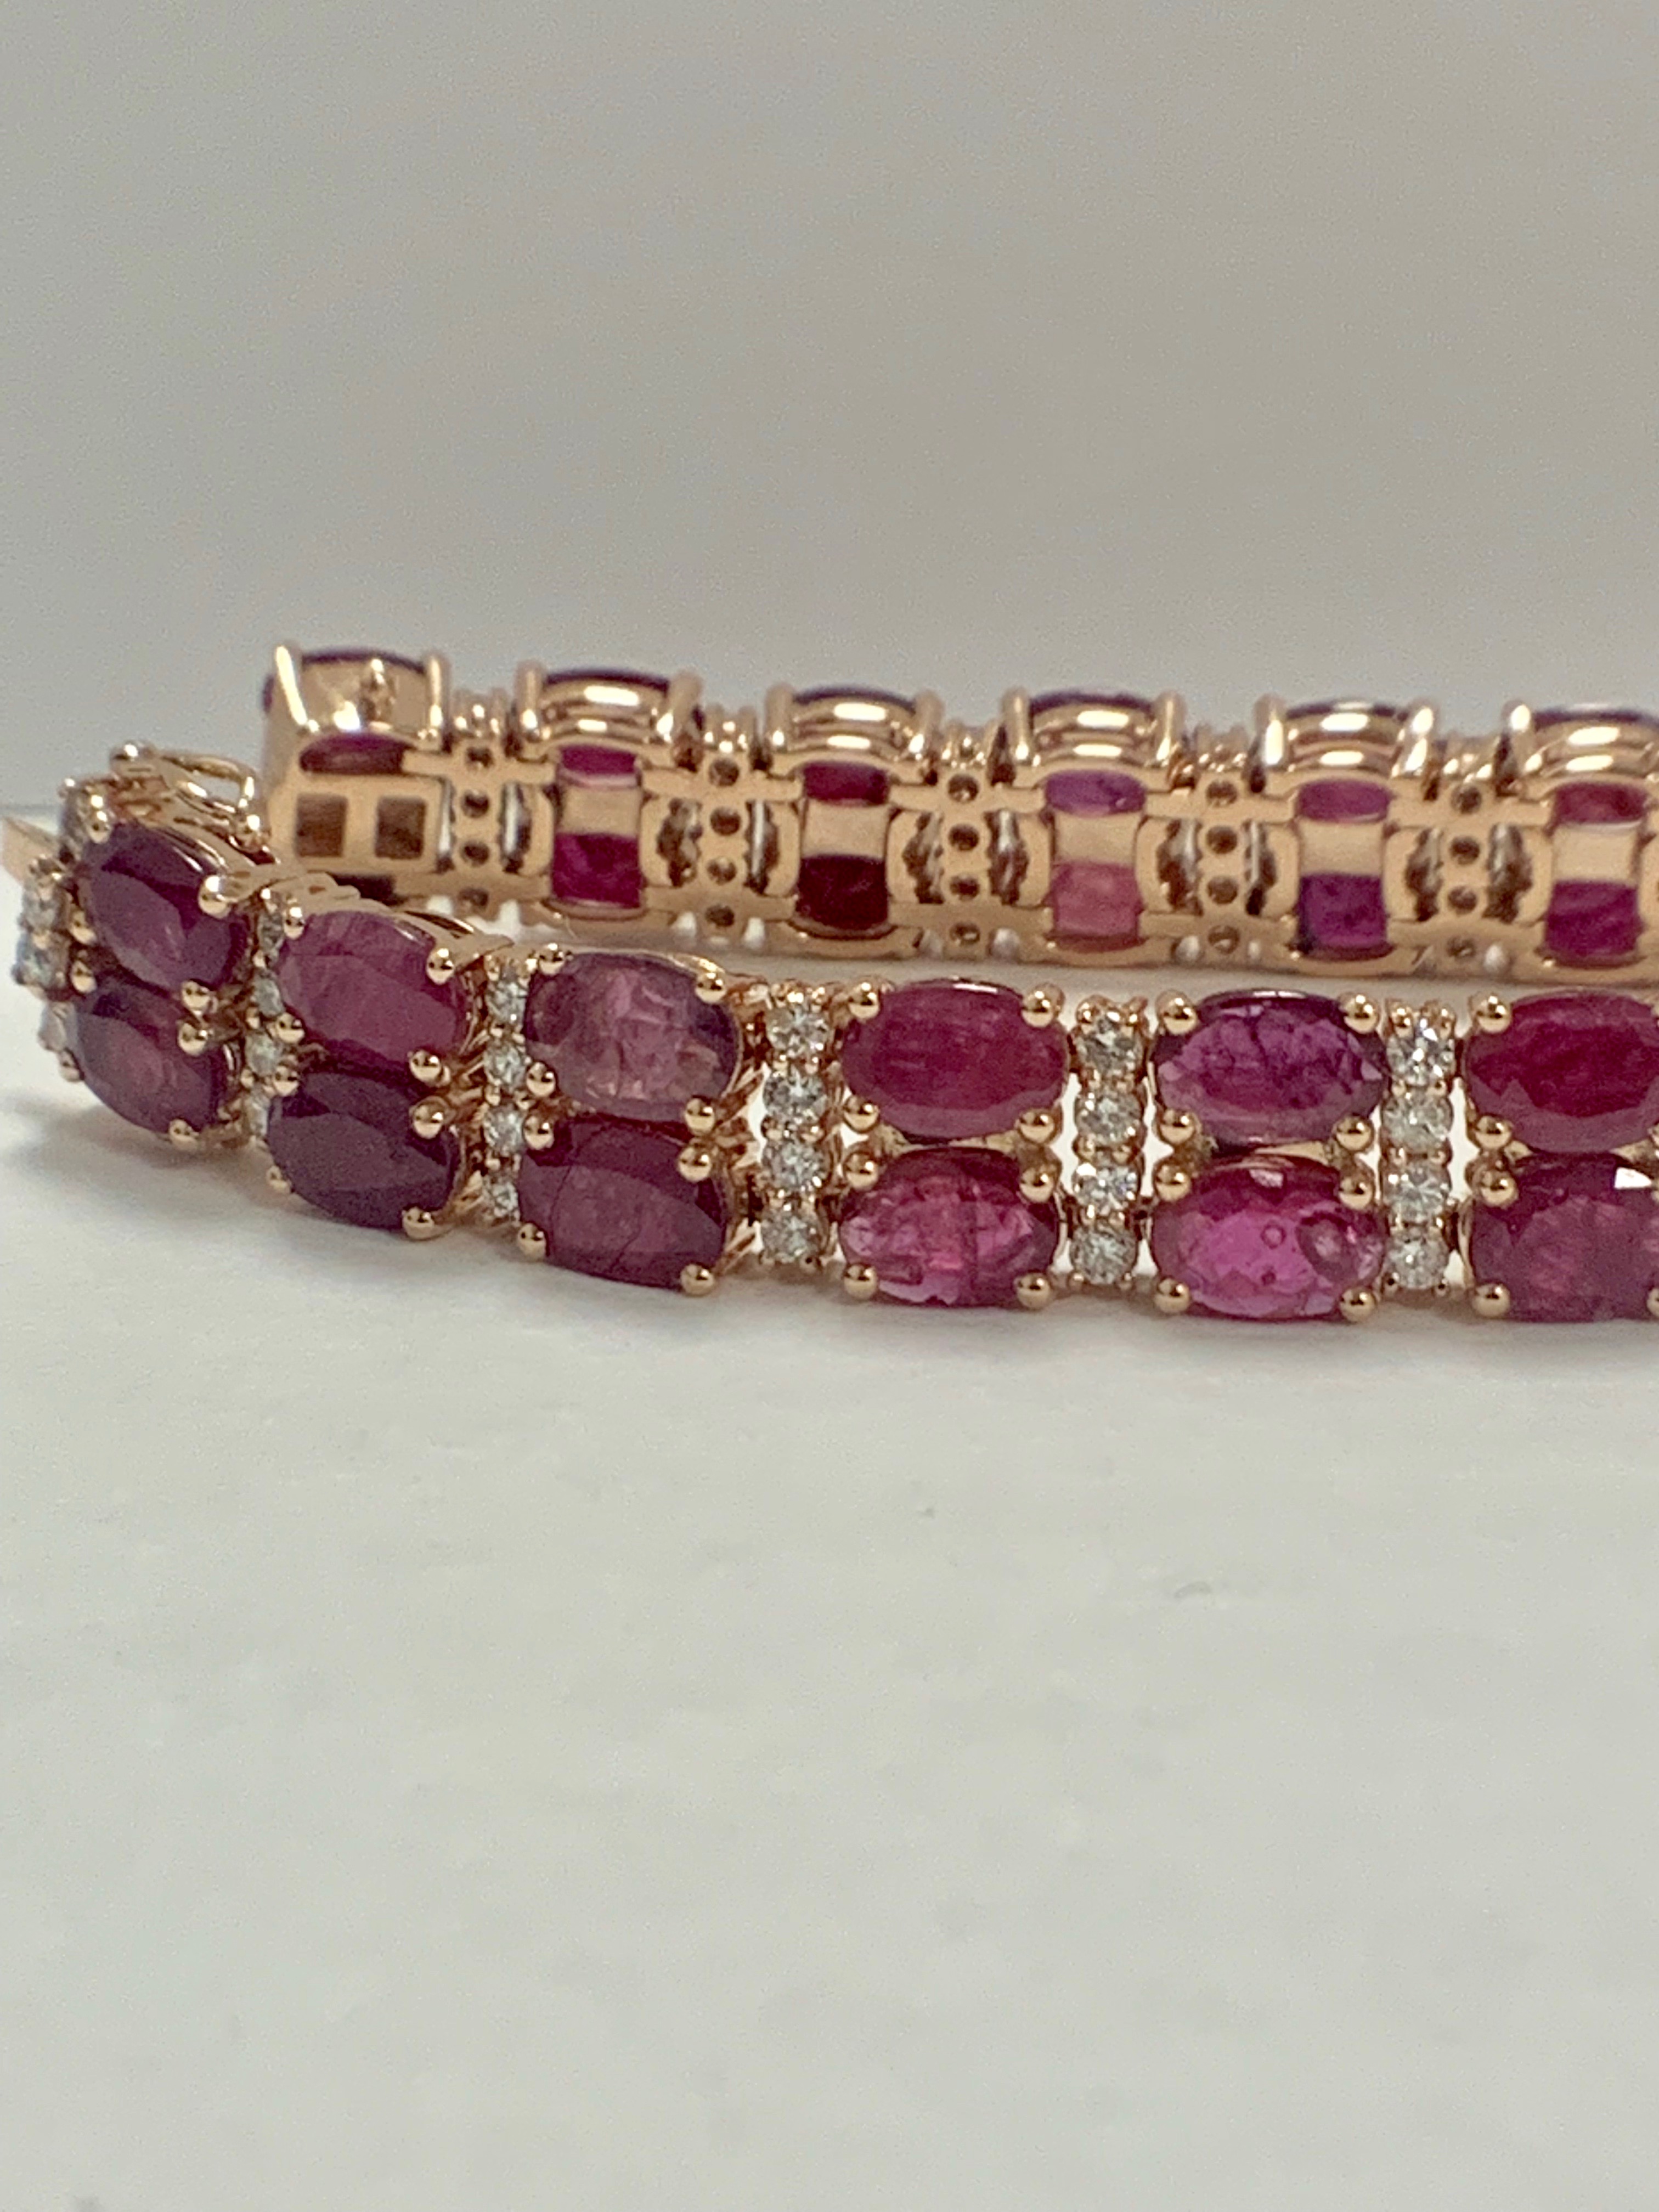 14ct Rose Gold Ruby and Diamond double row bracelet - Image 7 of 16